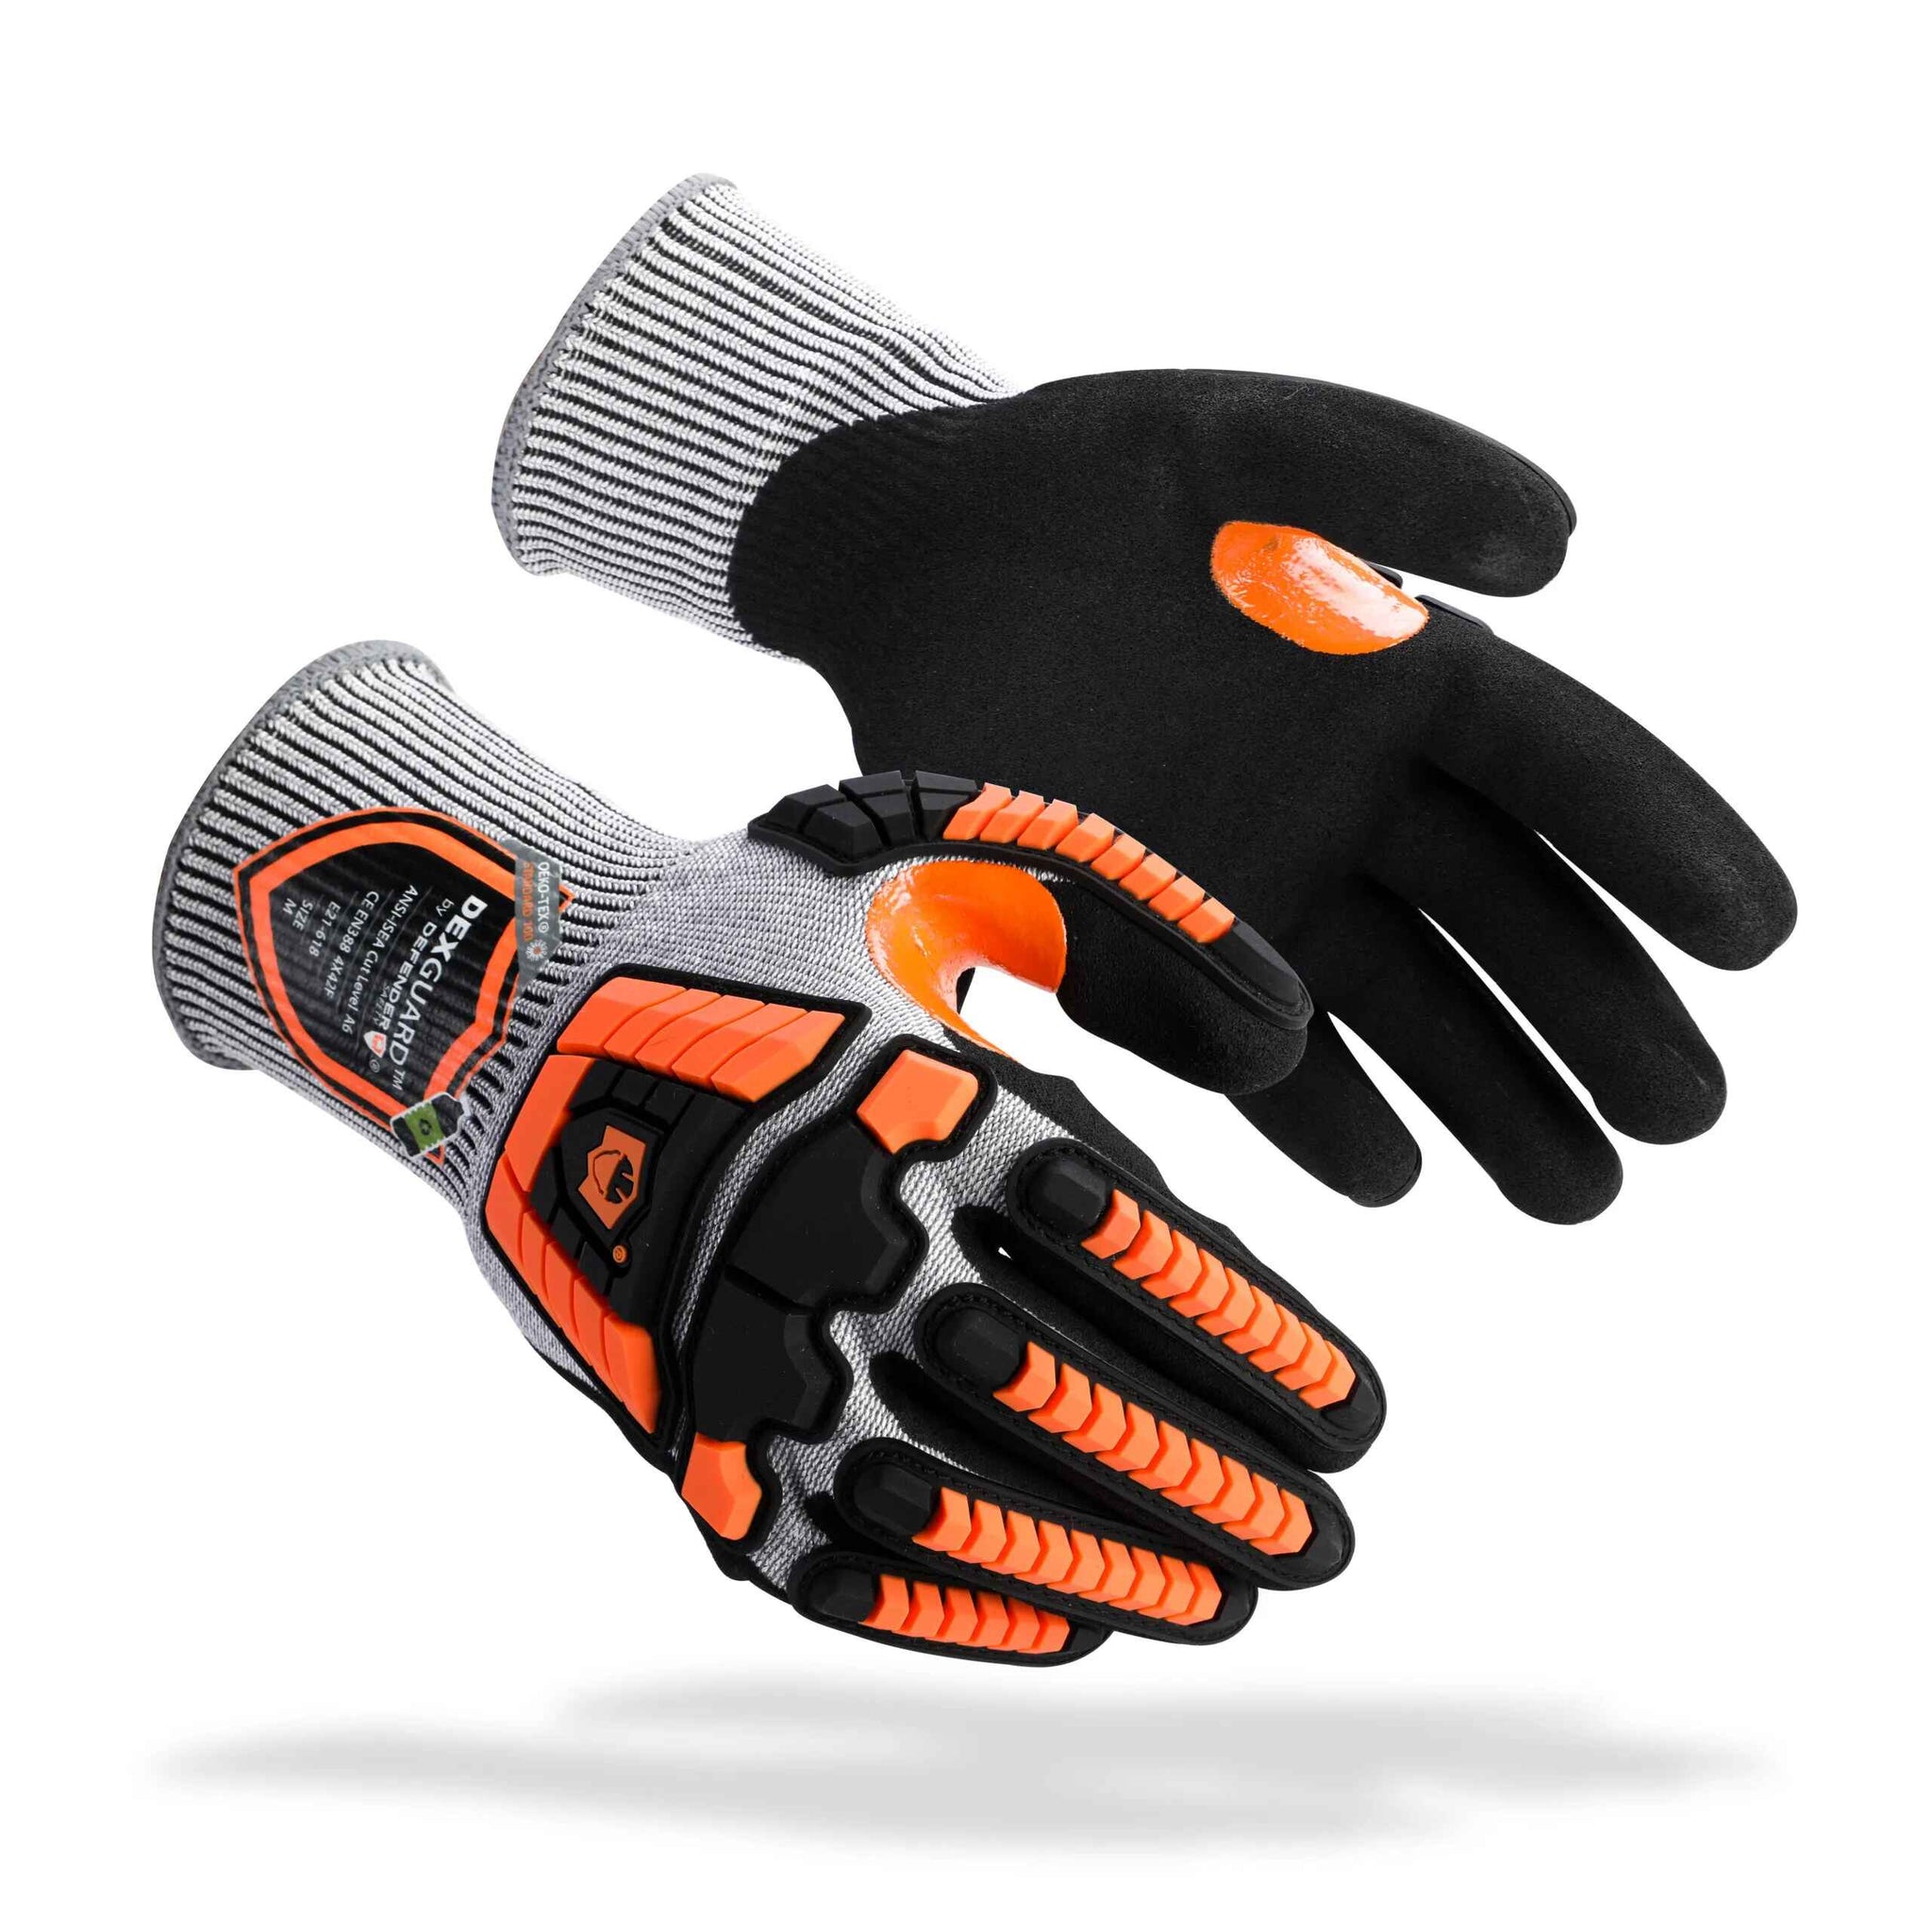 http://defendersafety.com/cdn/shop/products/dexguard-a6-cut-gloves-back-of-the-hand-impact-resistant-level-4-abrasion-resistant-textured-nitrile-coating-679554.jpg?v=1690825176&width=2048